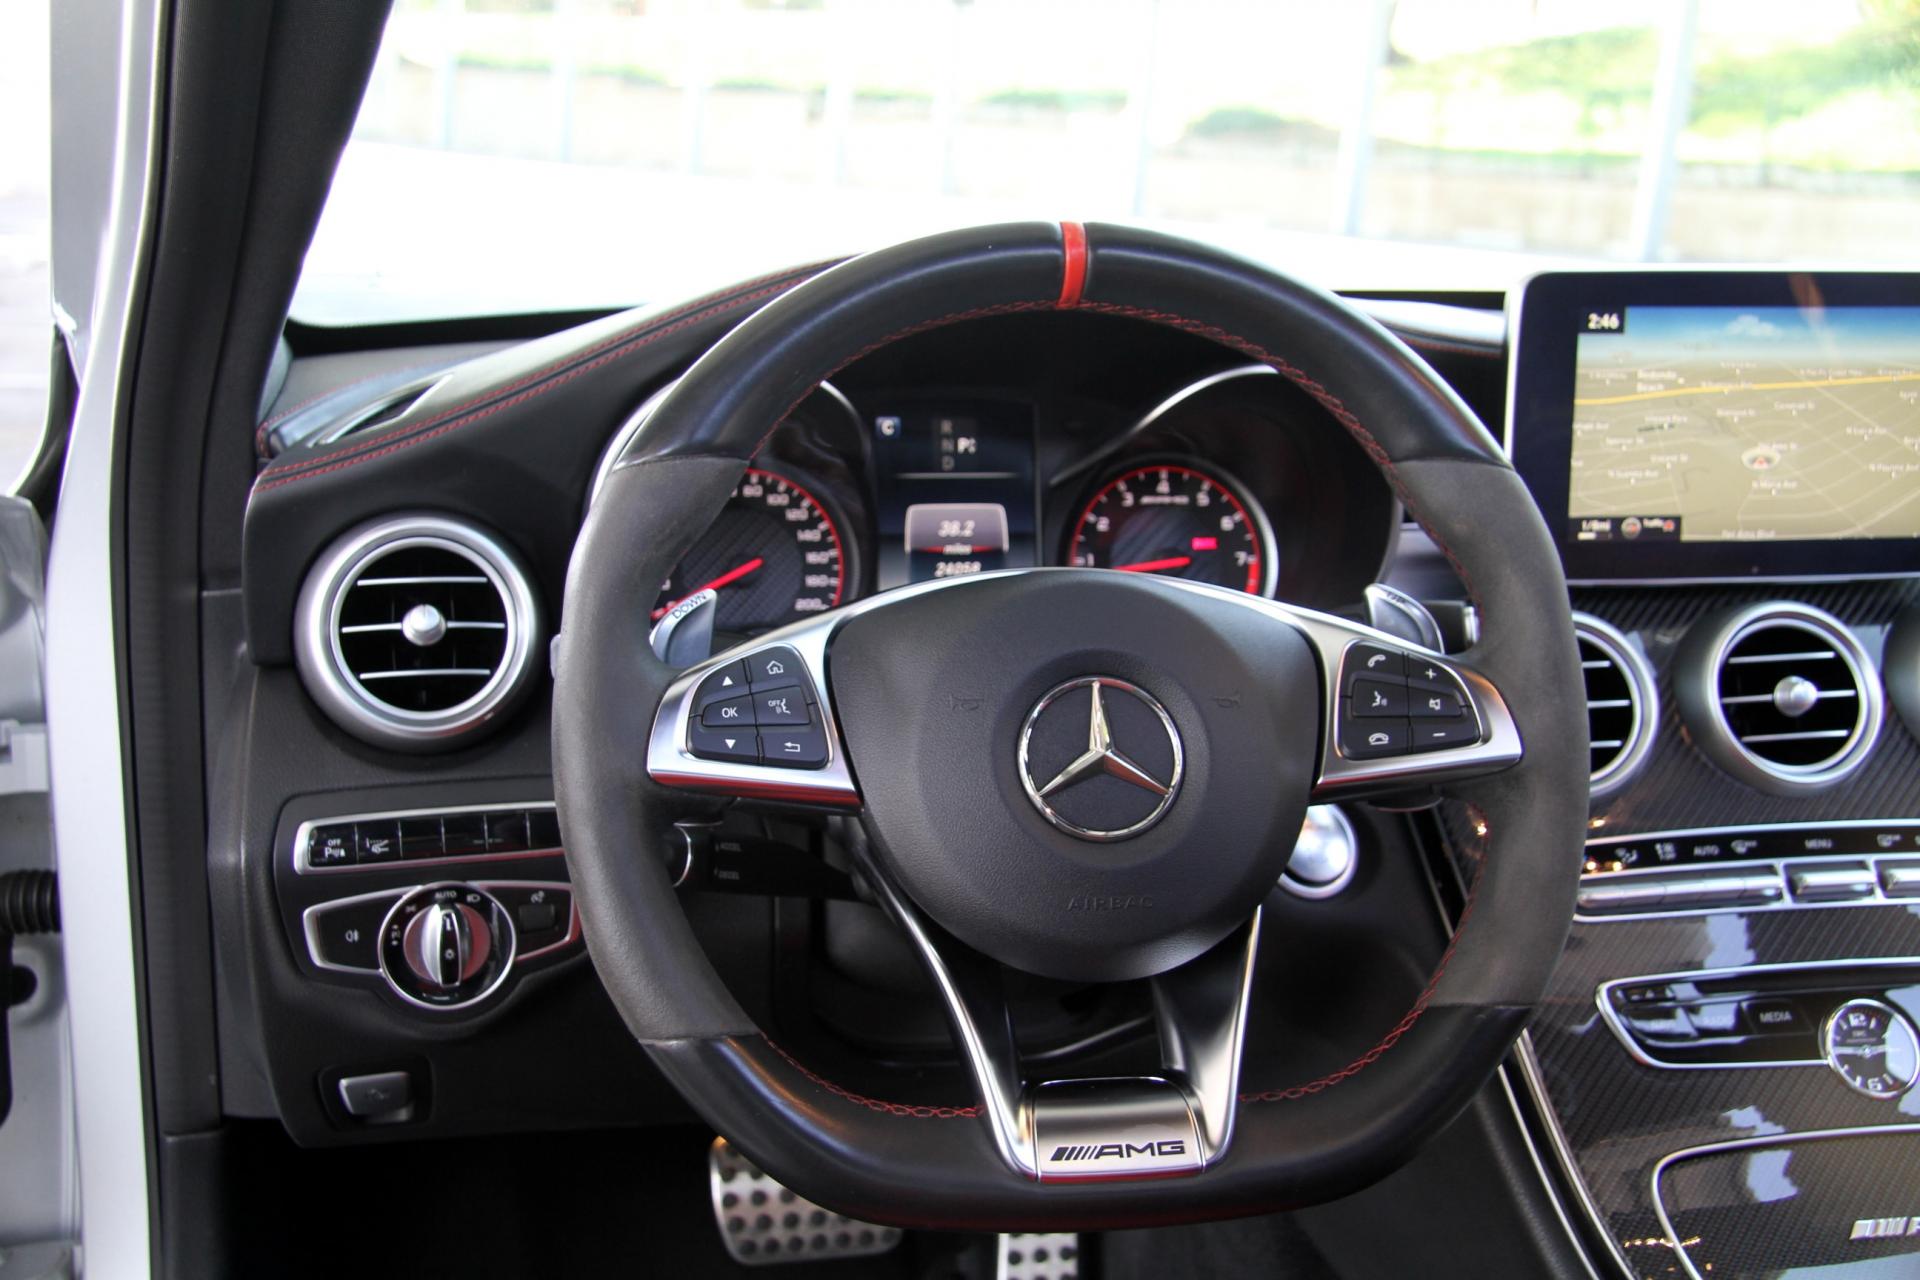 2016 Mercedes Benz C63 S Amg Stock 6004 For Sale Near